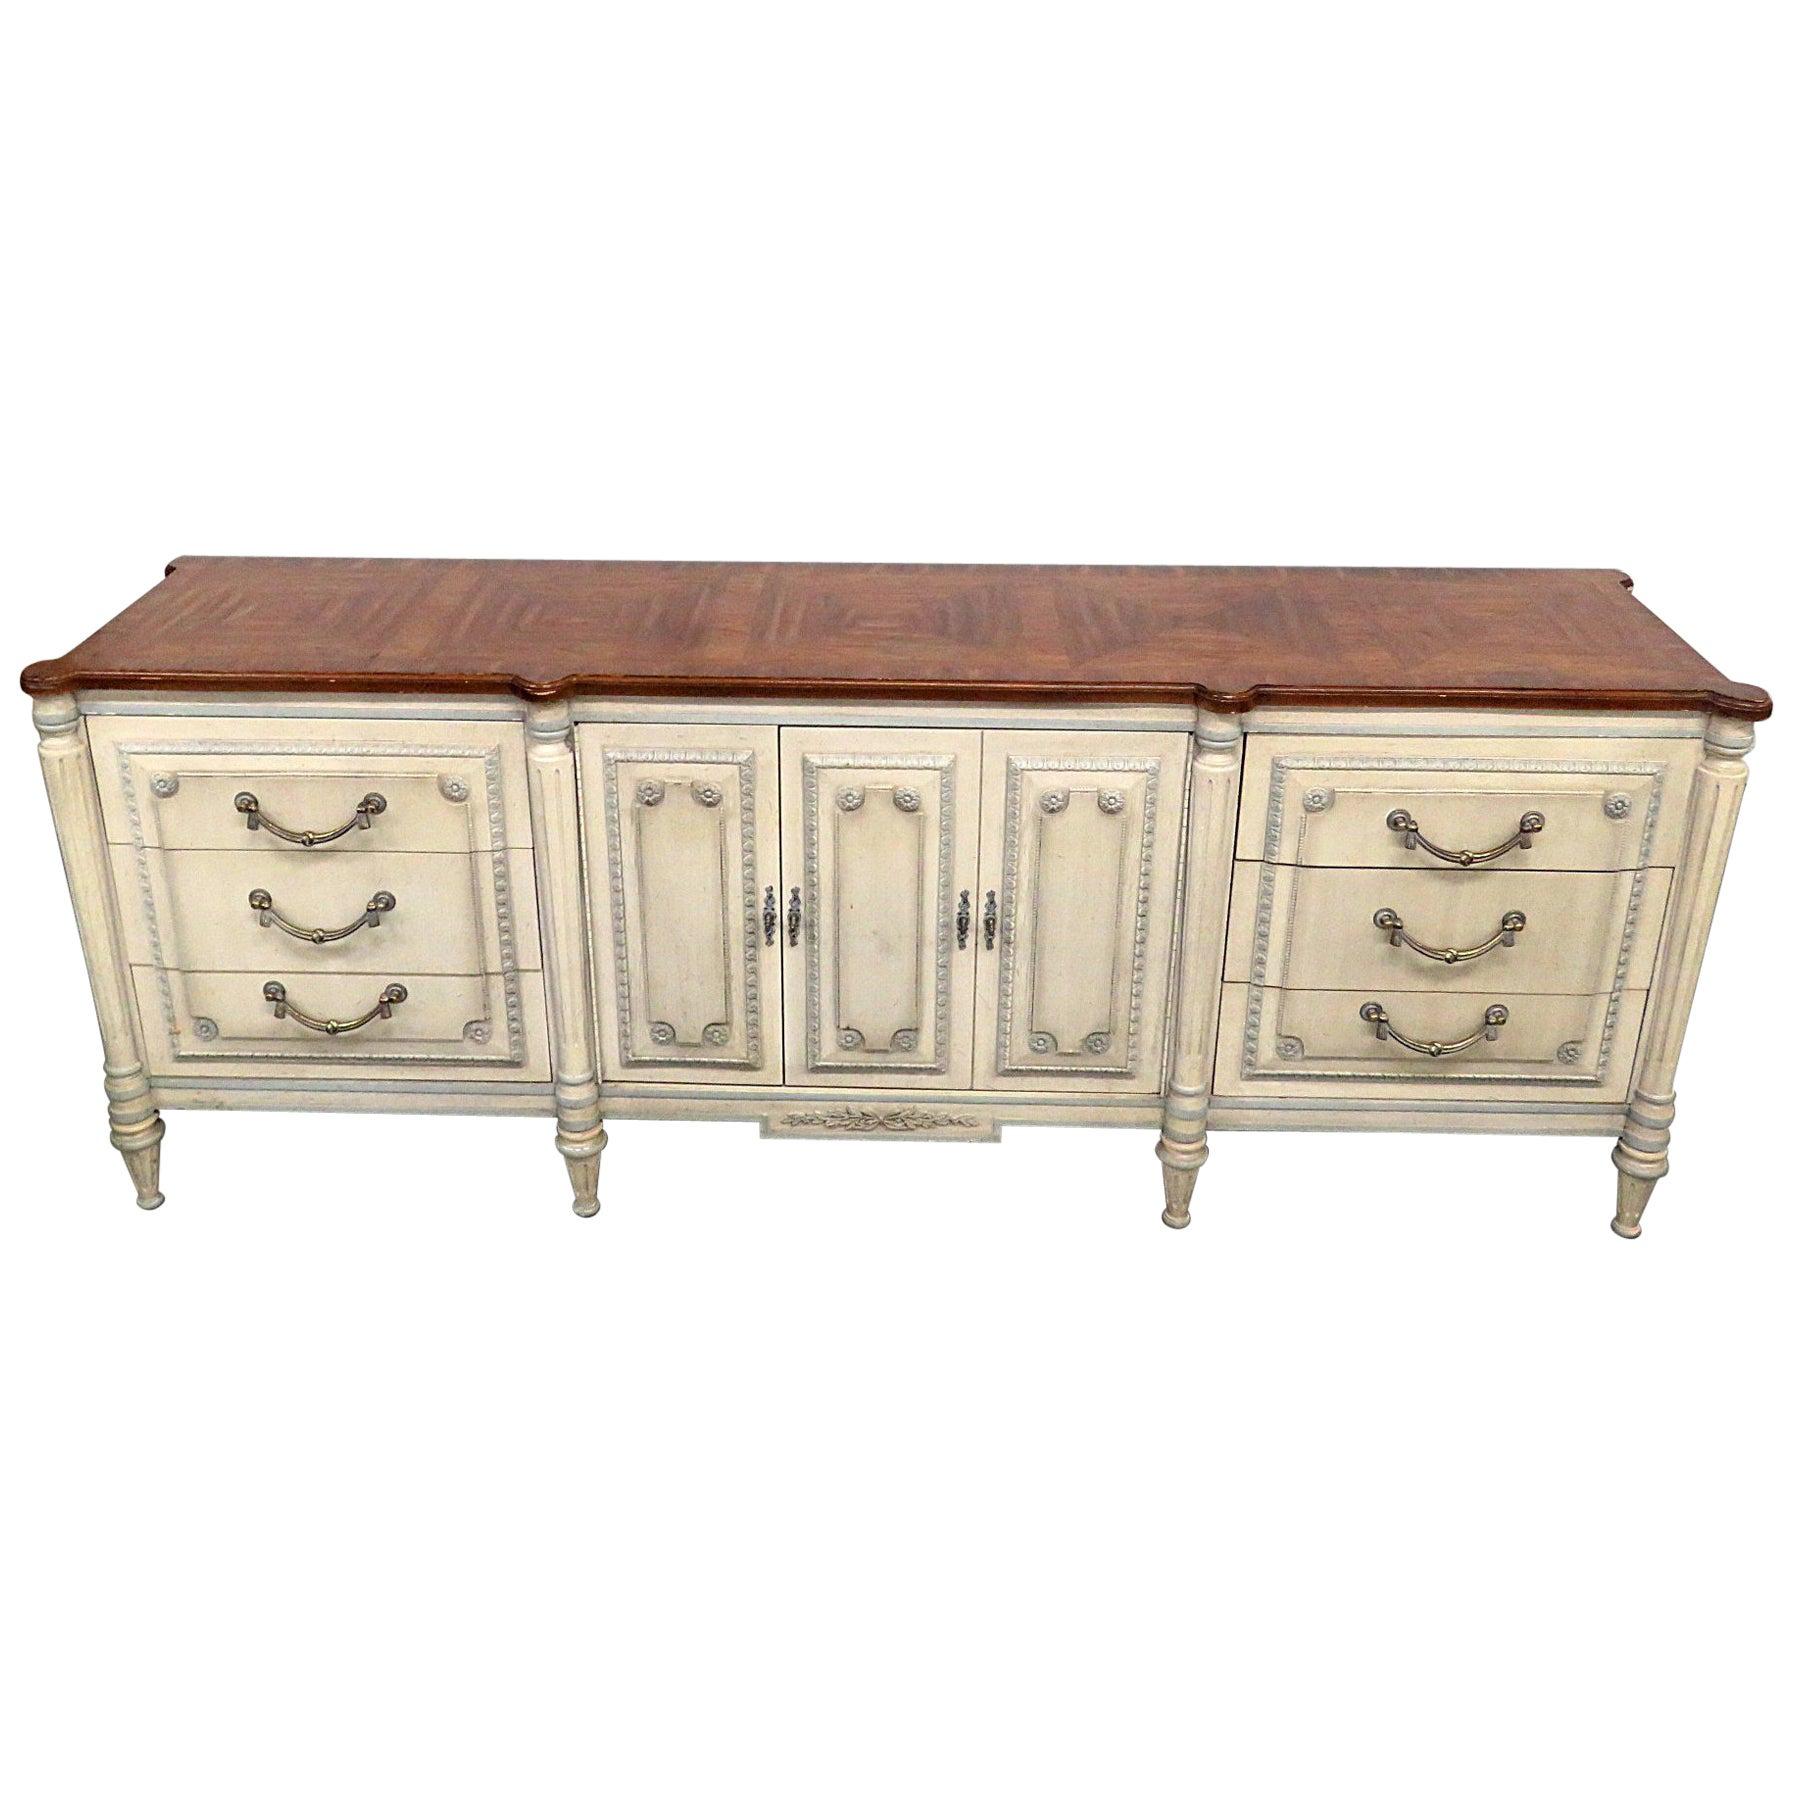 Long French Louis XVI Style Painted Triple Dresser Sideboard